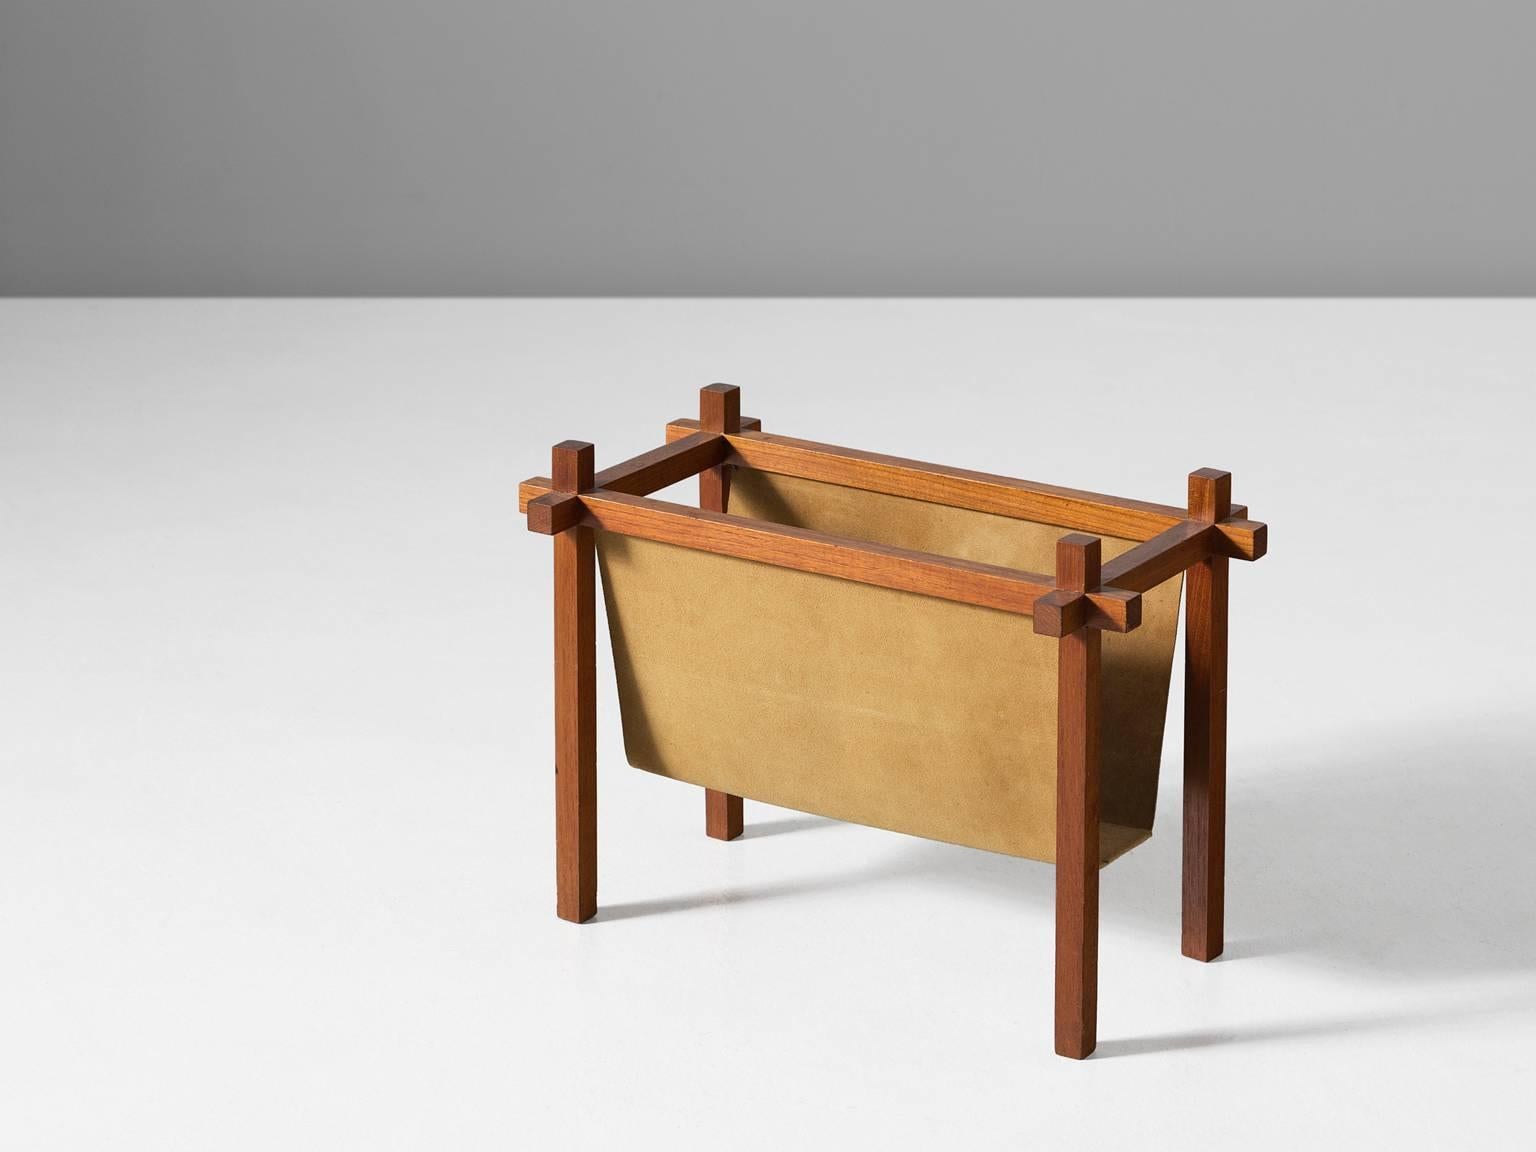 Magazine rack, in teak and leather, by Skjode Skjern, Denmark, 1950s. 

Nice constructed wooden magazine holder with suede. The design is simplistic, yet the construction shows nice wood-joints. A suede cloth hangs in the wooden frame and provides